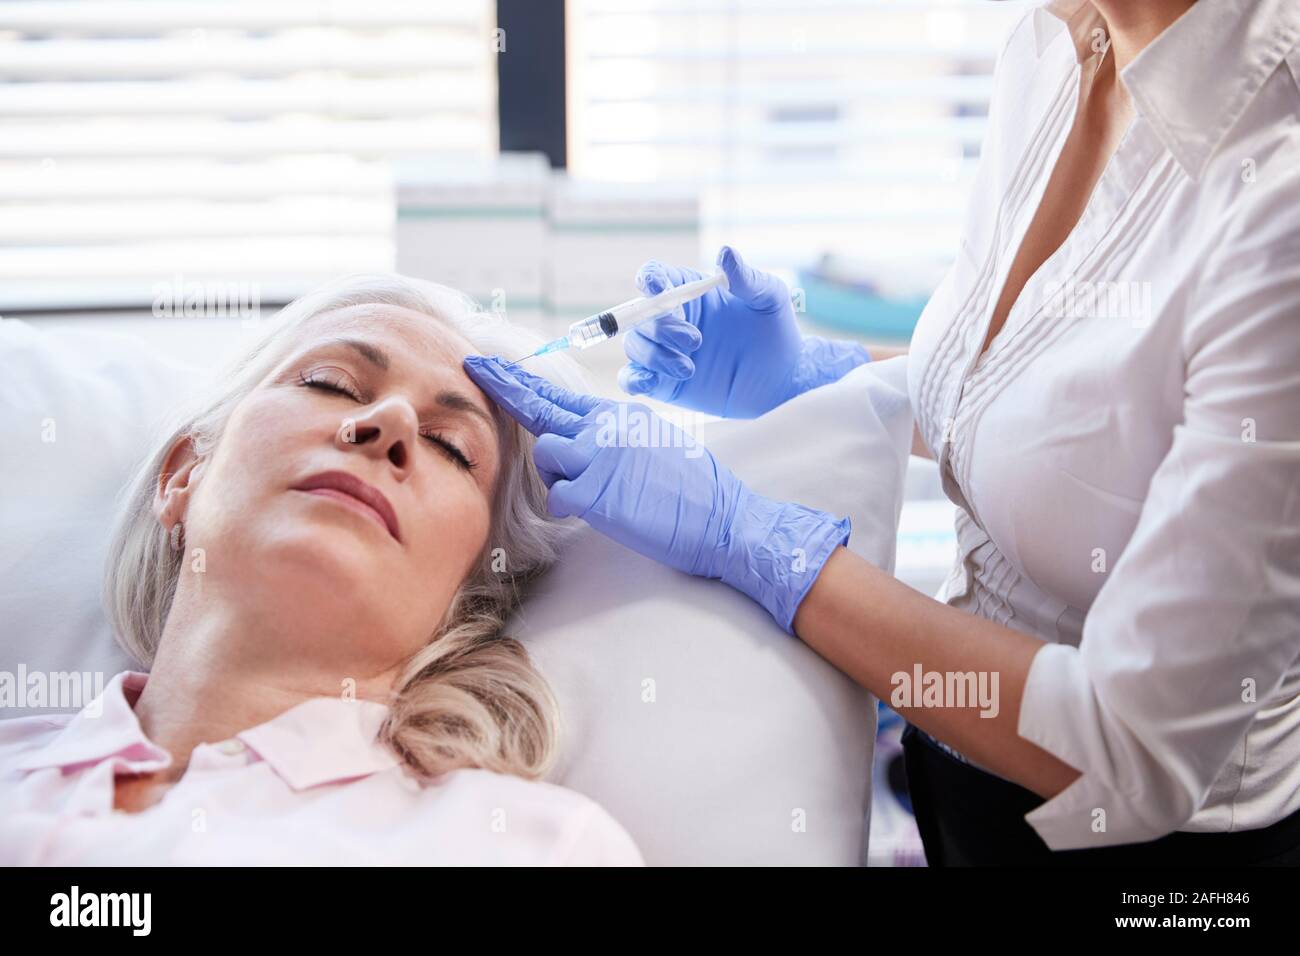 Beautician Giving Mature Female Patient Botox Injection In Forehead Stock Photo